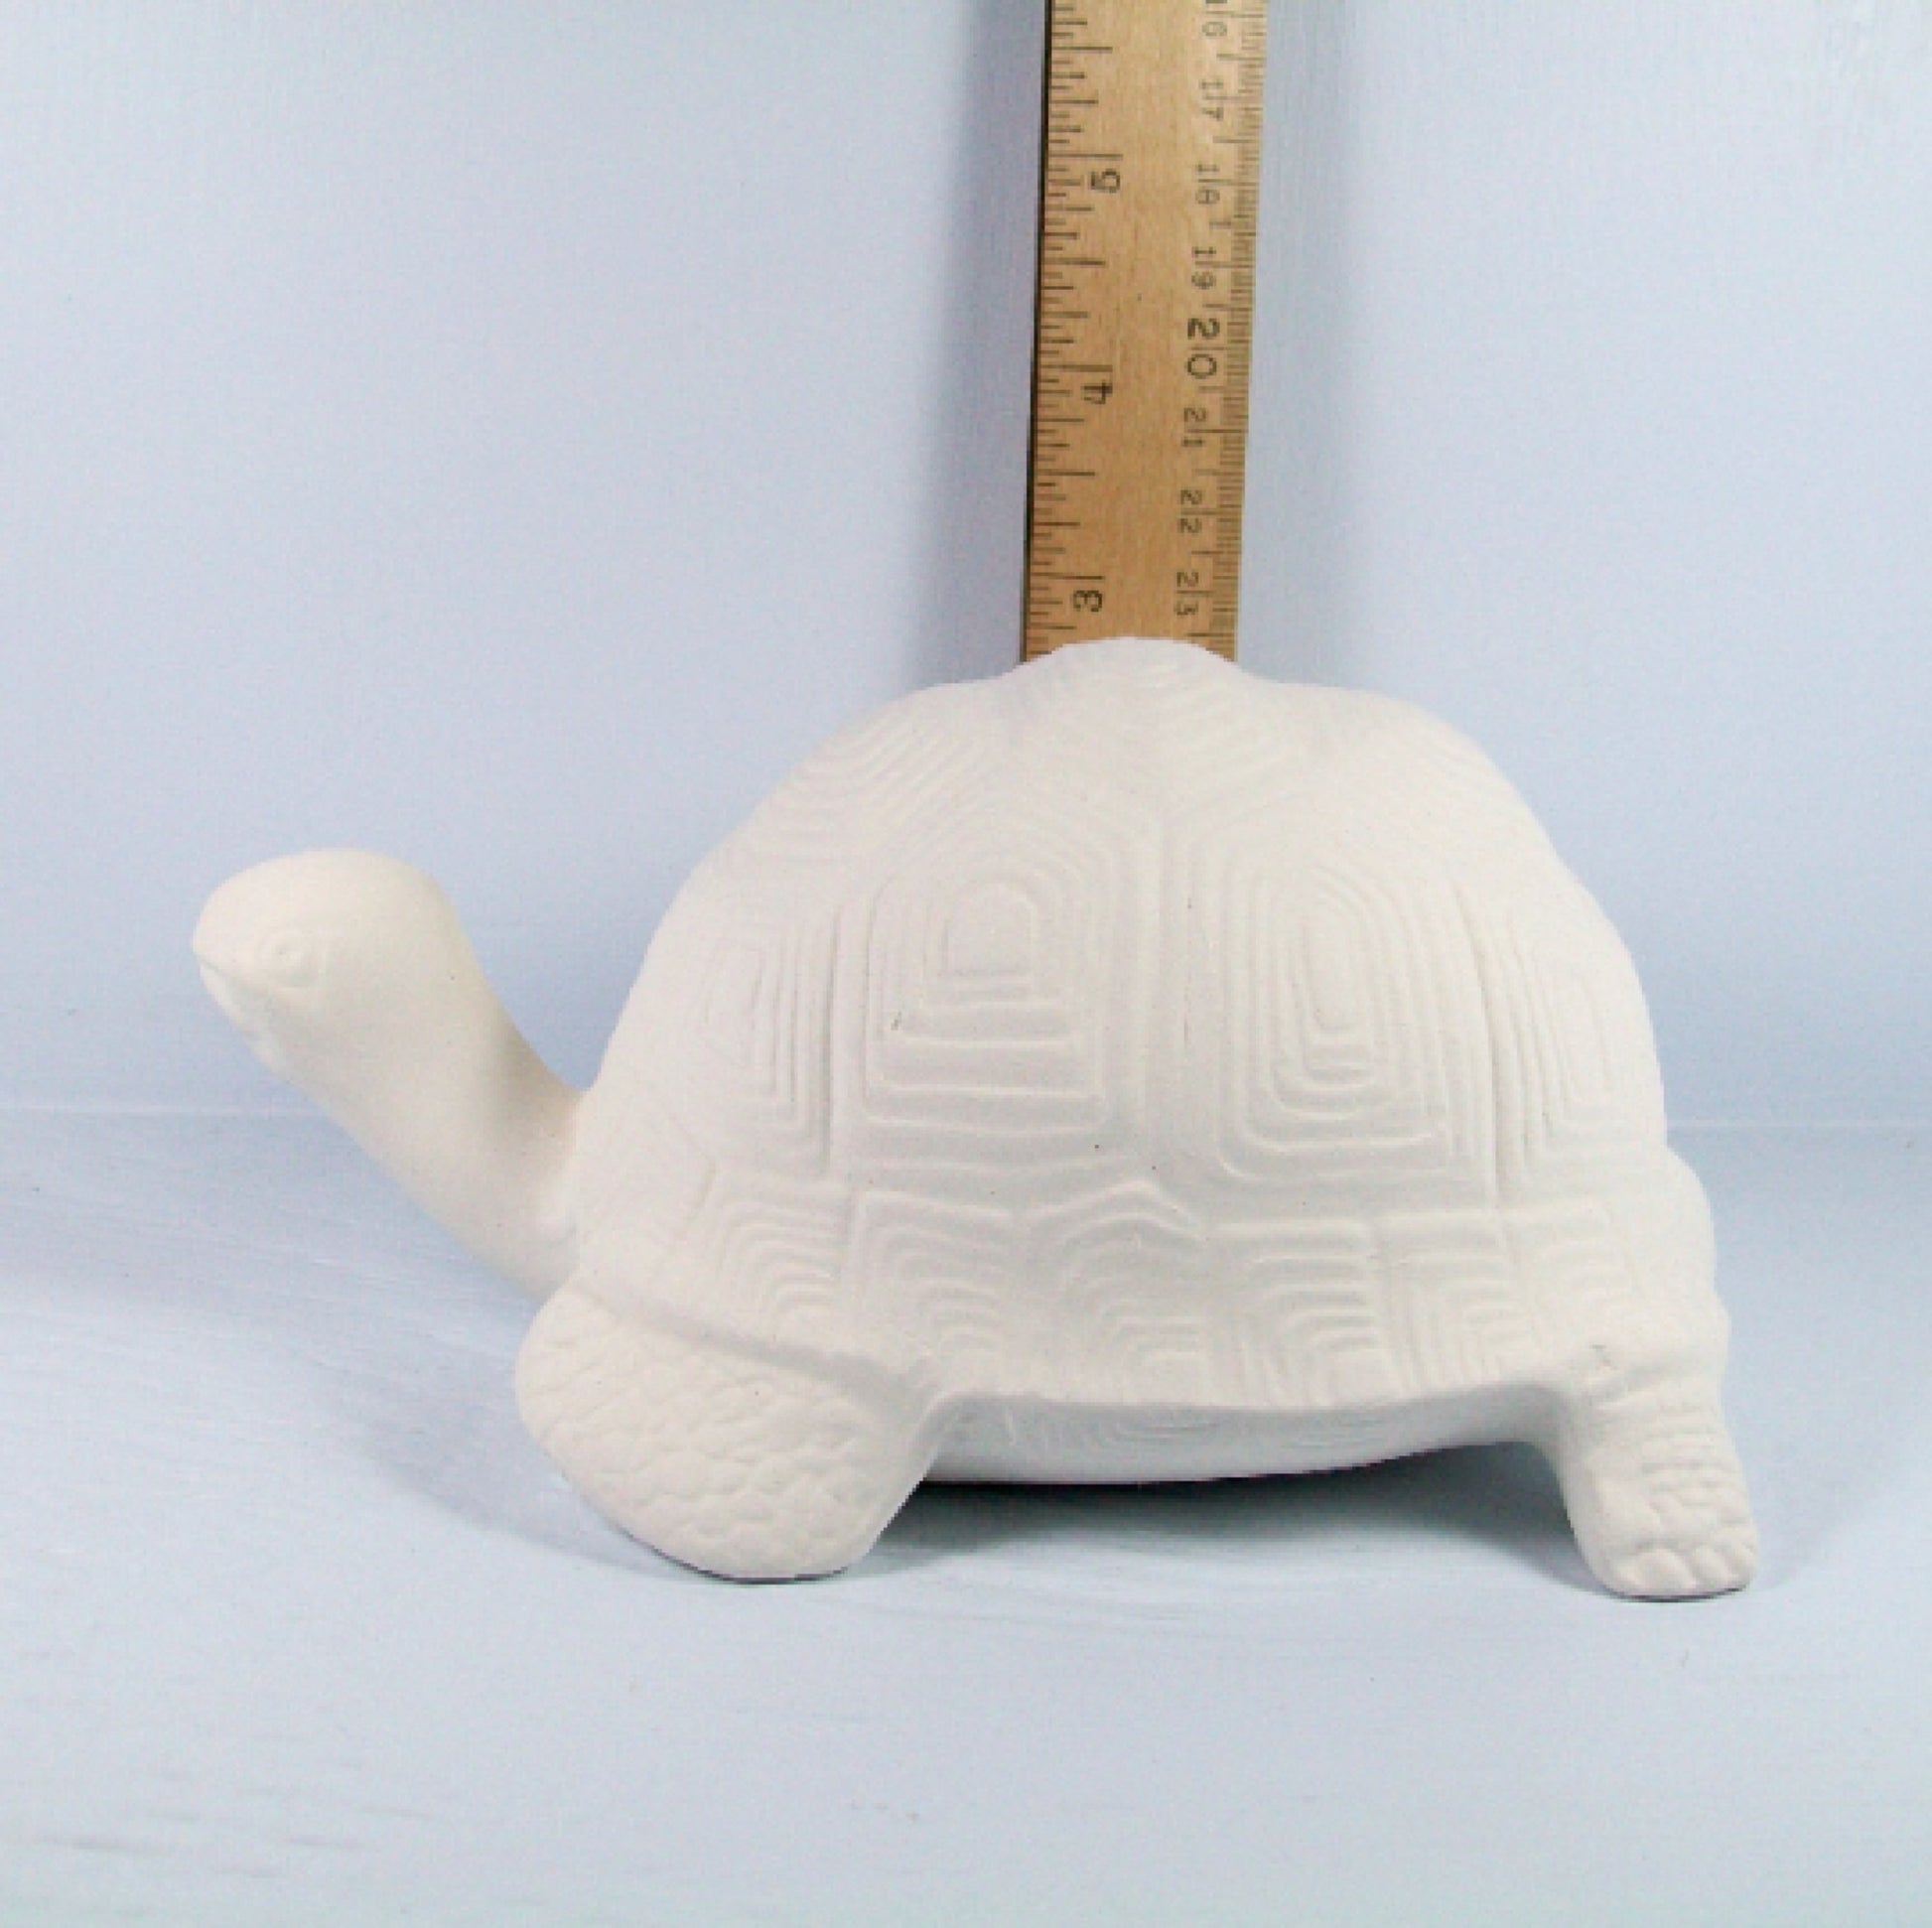 Ready to Paint ceramic turtle figurine  side view facing left near ruler showing it to be almost 3 inches tall.